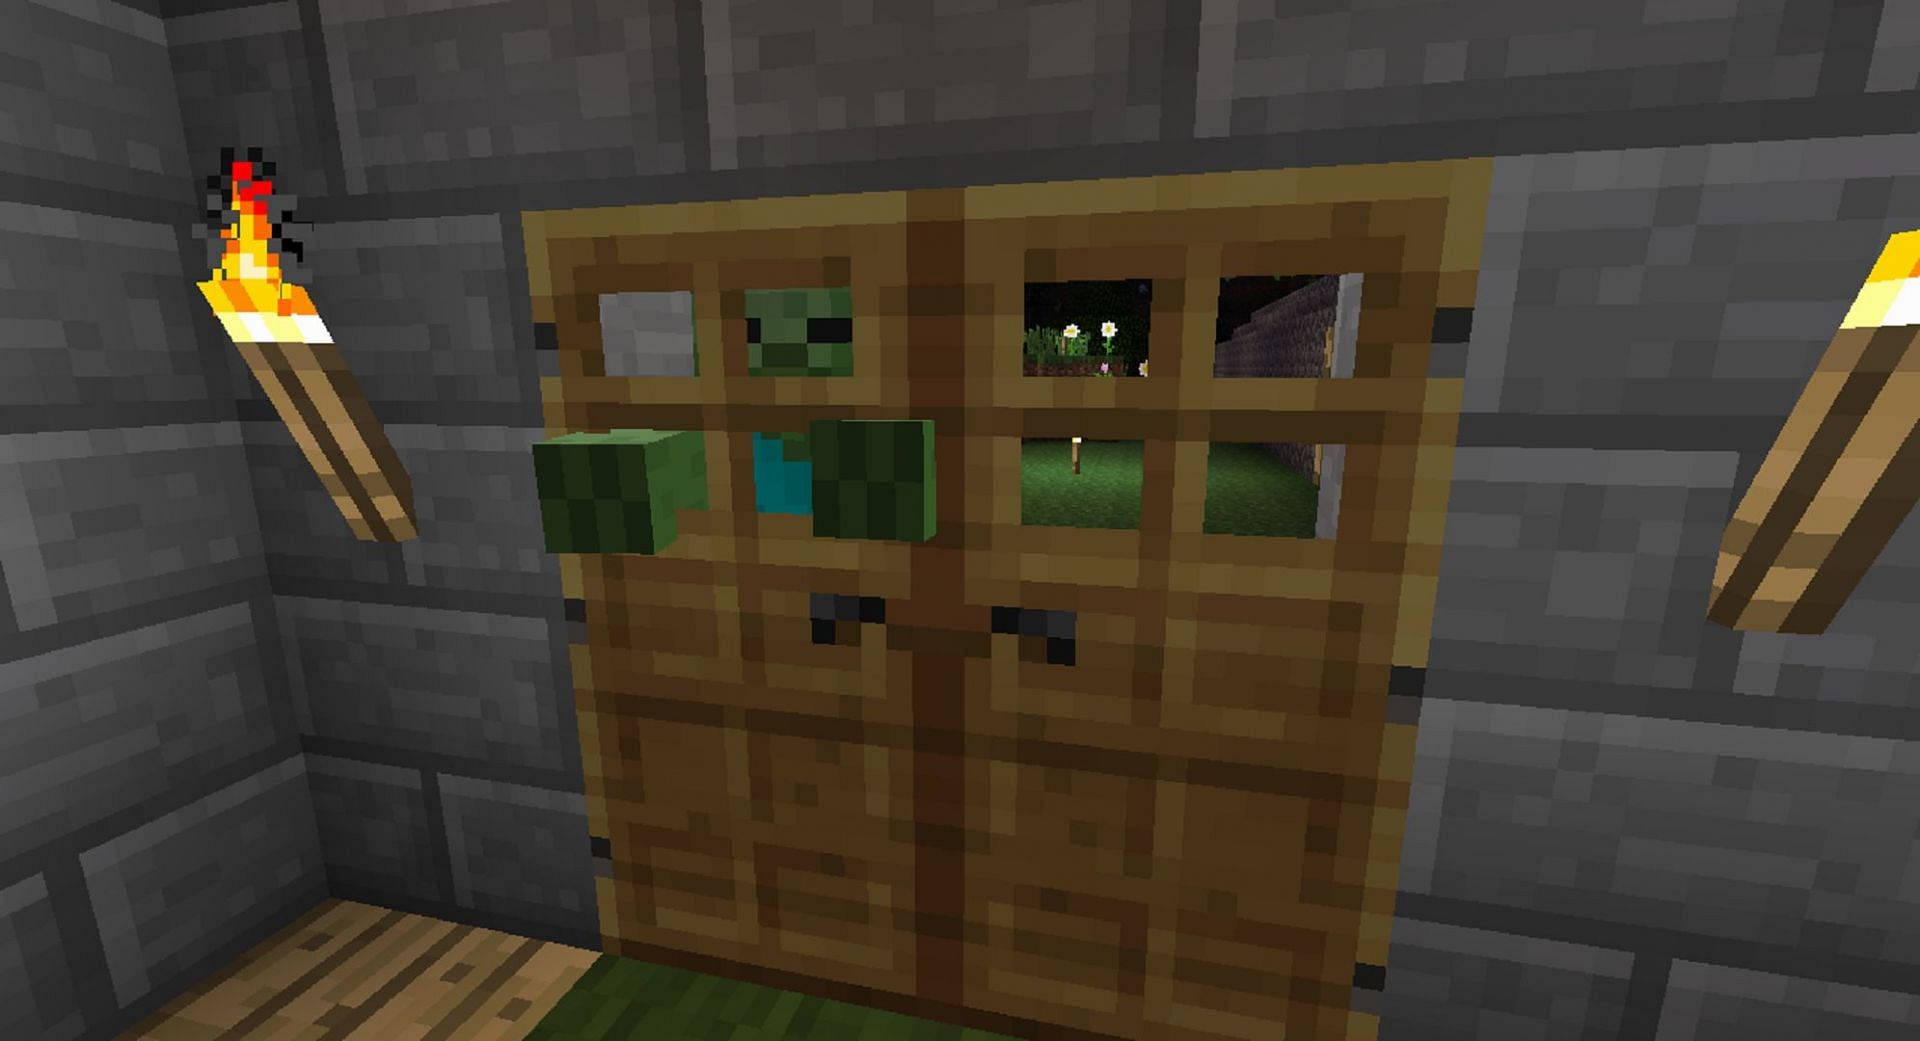 Zombies will attempt to smash doors to reach gamers and villagers (Image via Mojang Bug Report)